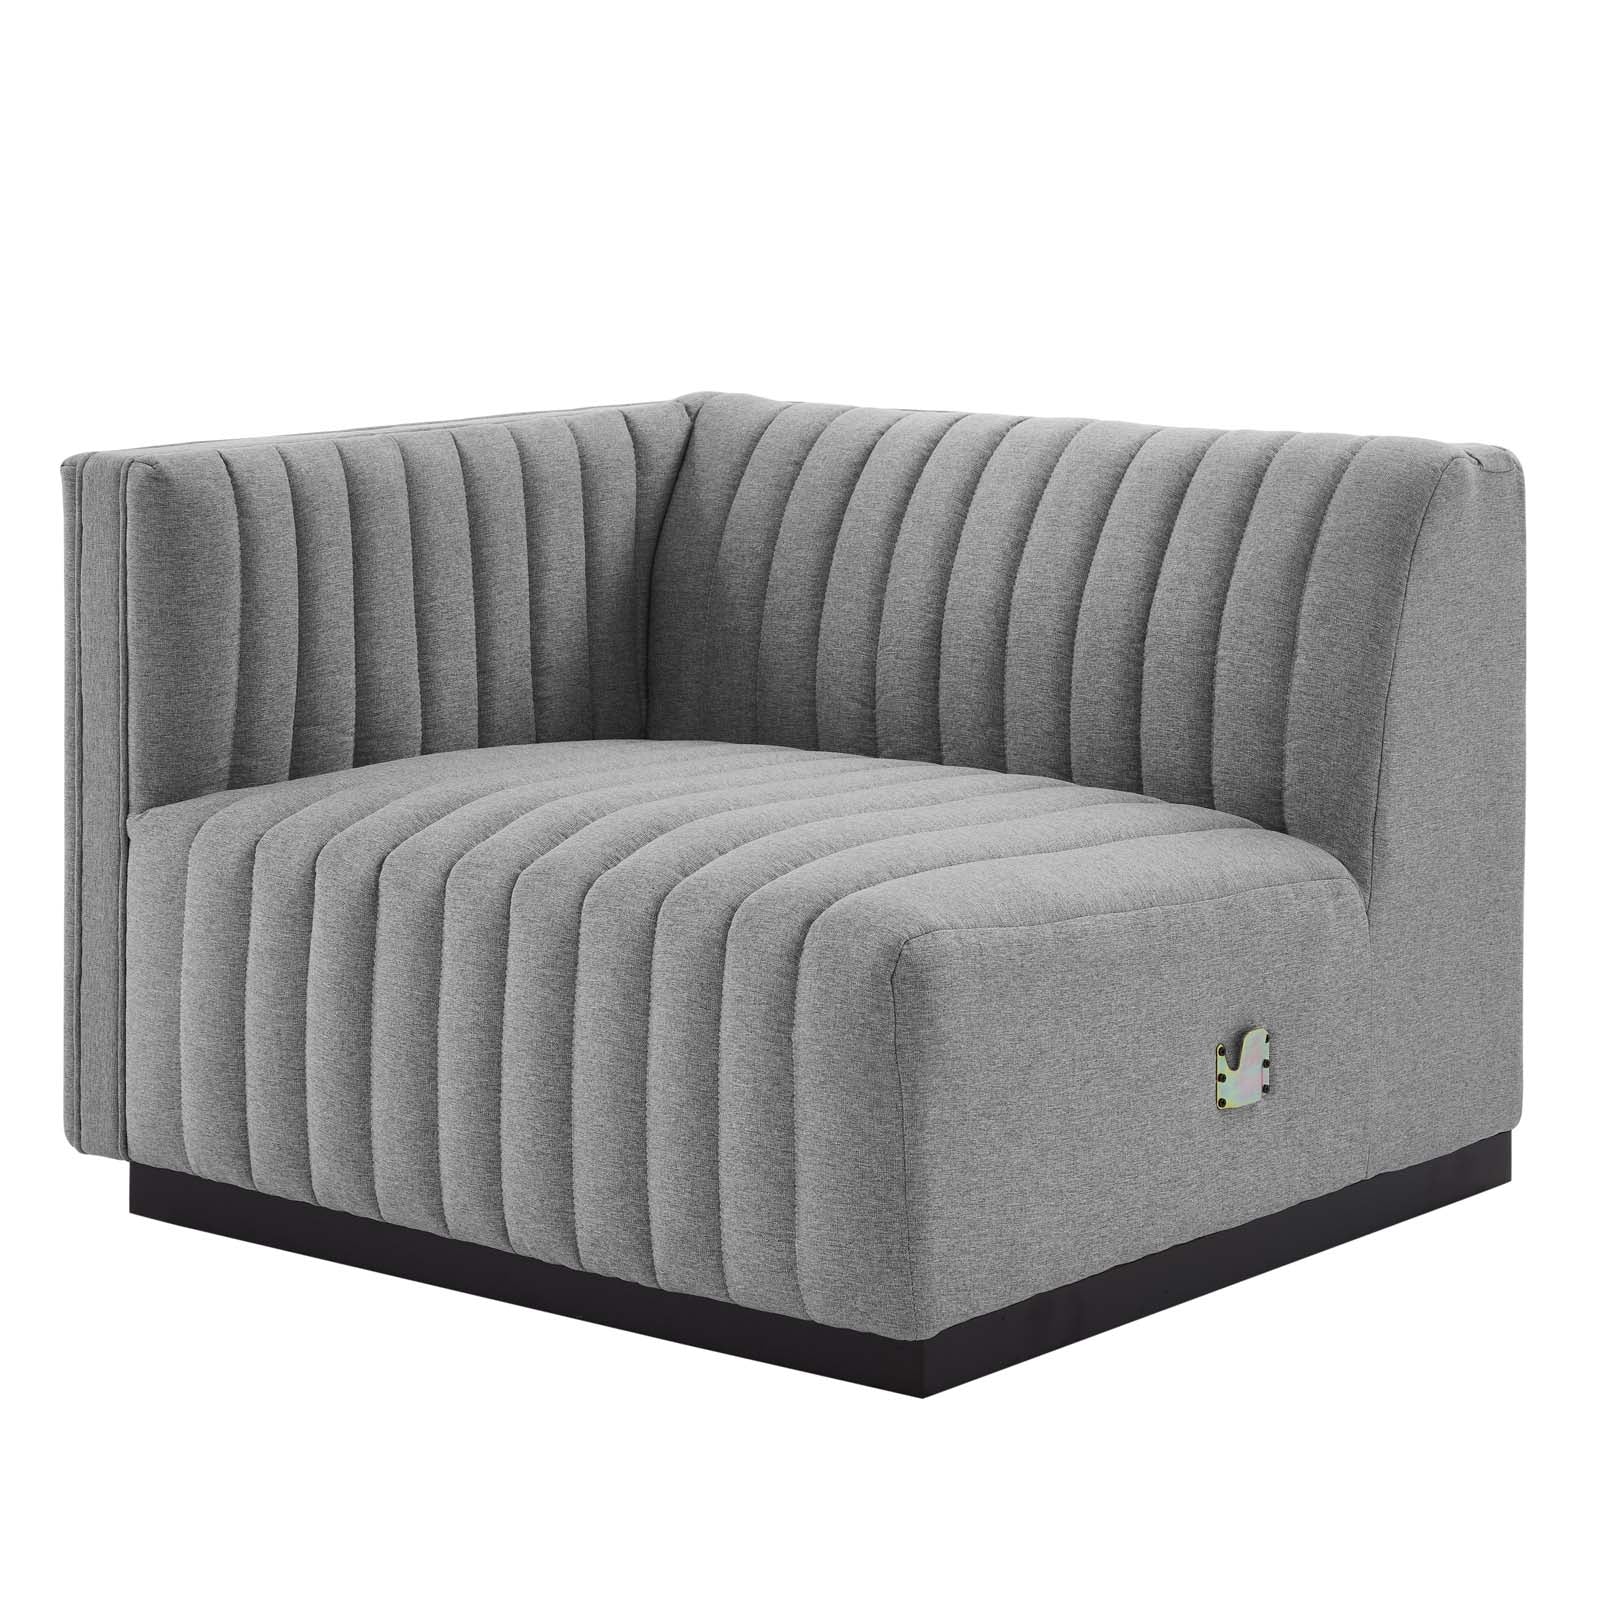 Modway Sectional Sofas - Conjure Channel Tufted 73 " W Upholstered Fabric 4-Piece L-Shaped Sectional Black Light Gray